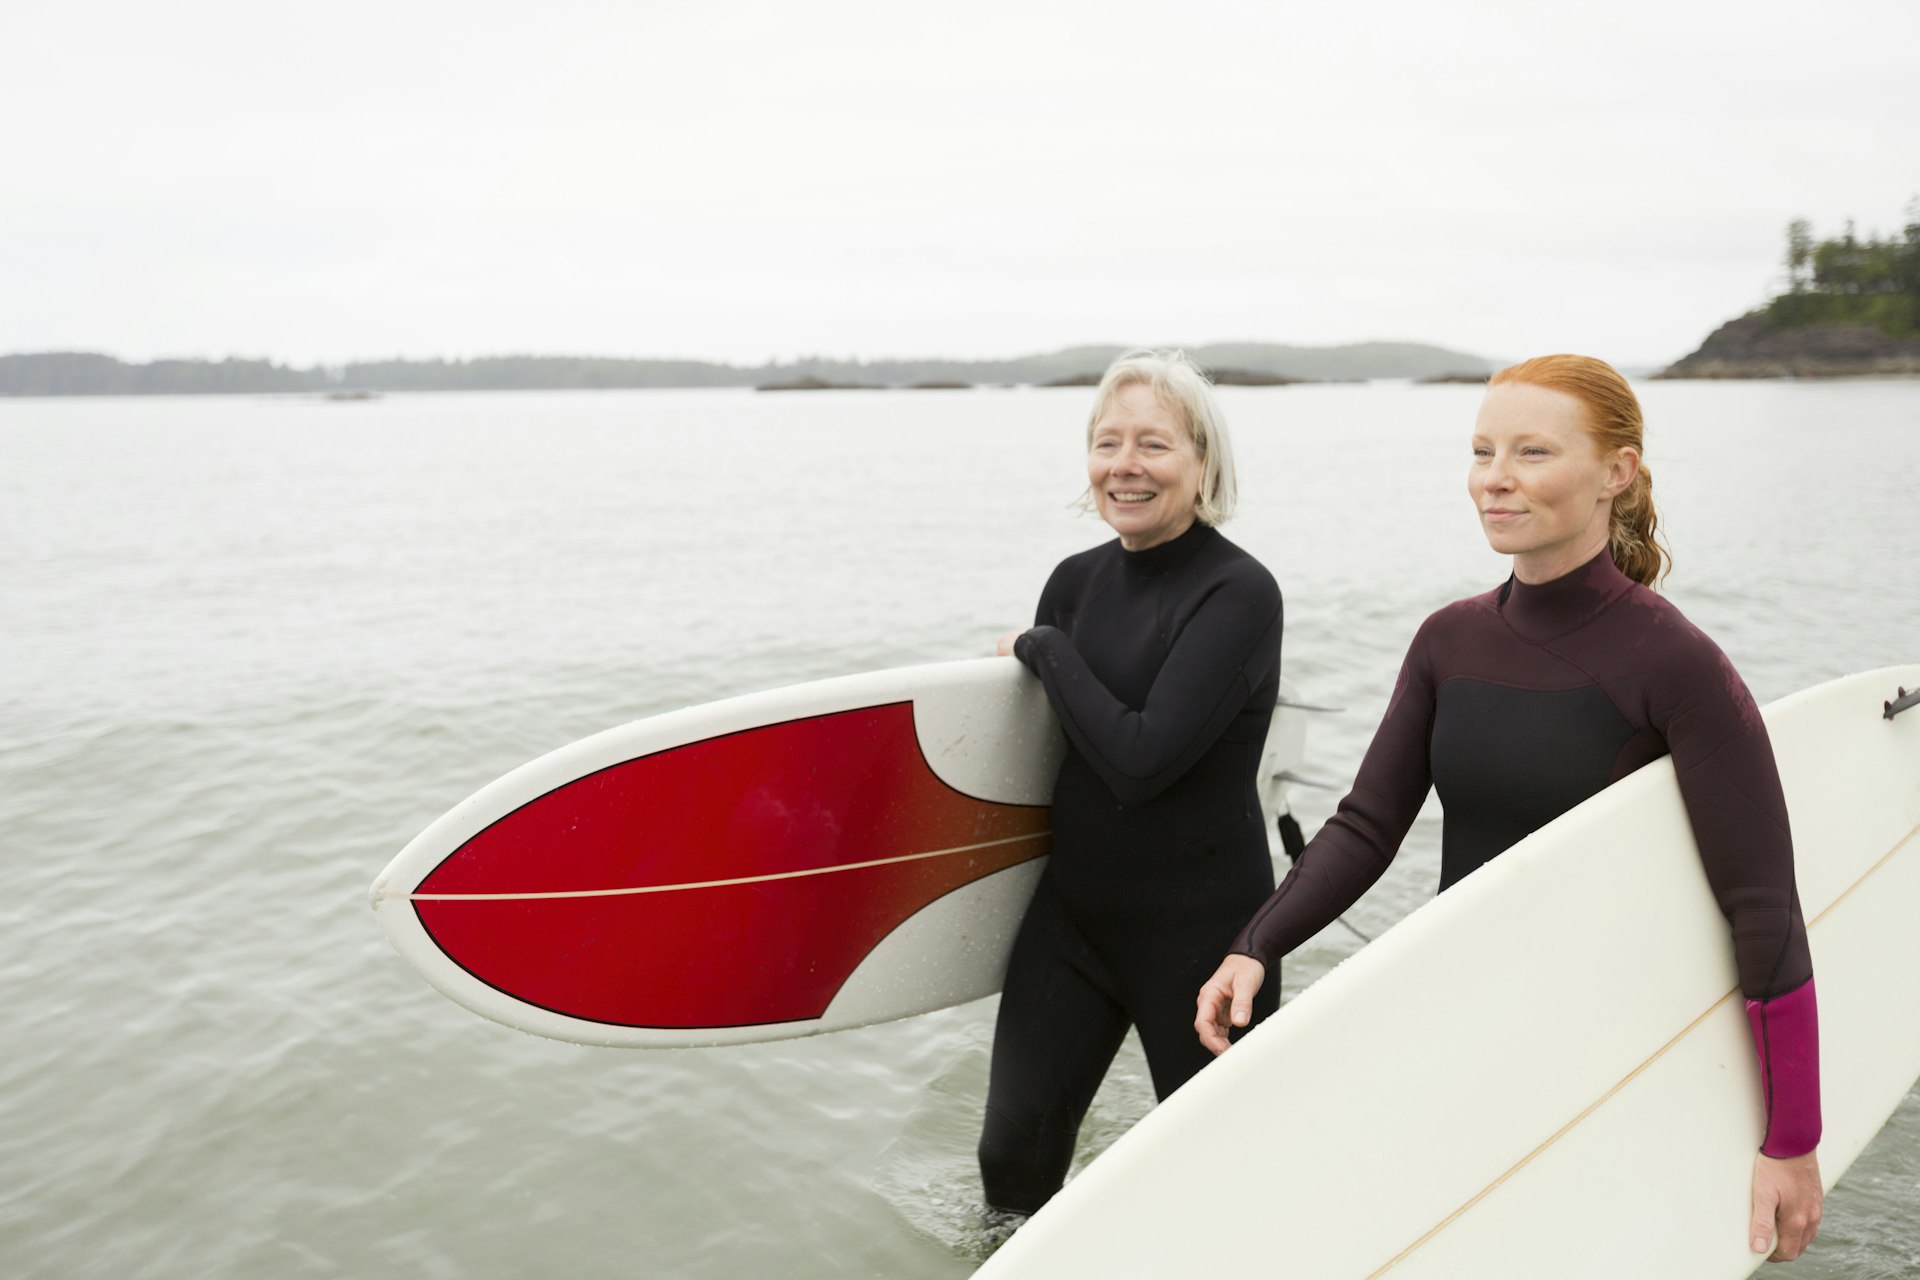 Two surfers carrying boards walk along a beach smiling